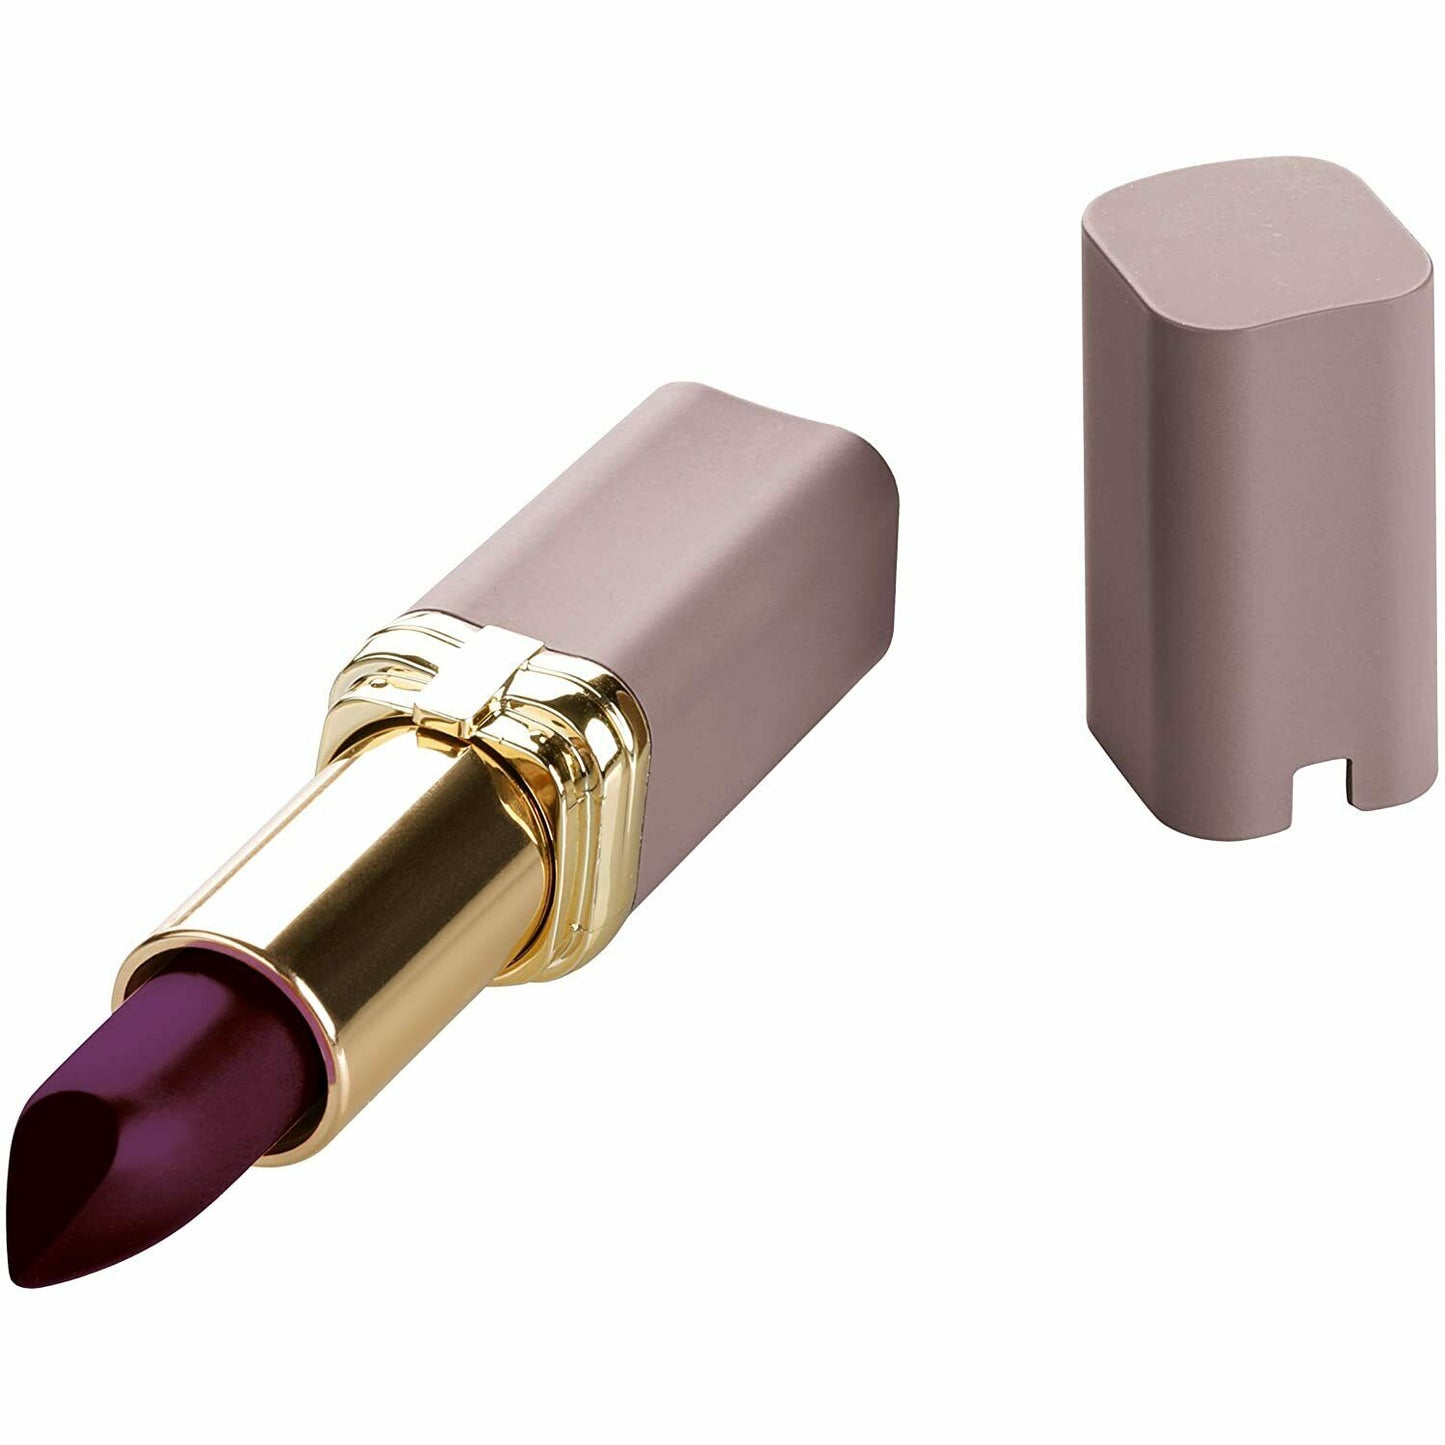 L'Oreal Color Riche Ultra Matte Highly Pigmented Nude Lipstick,